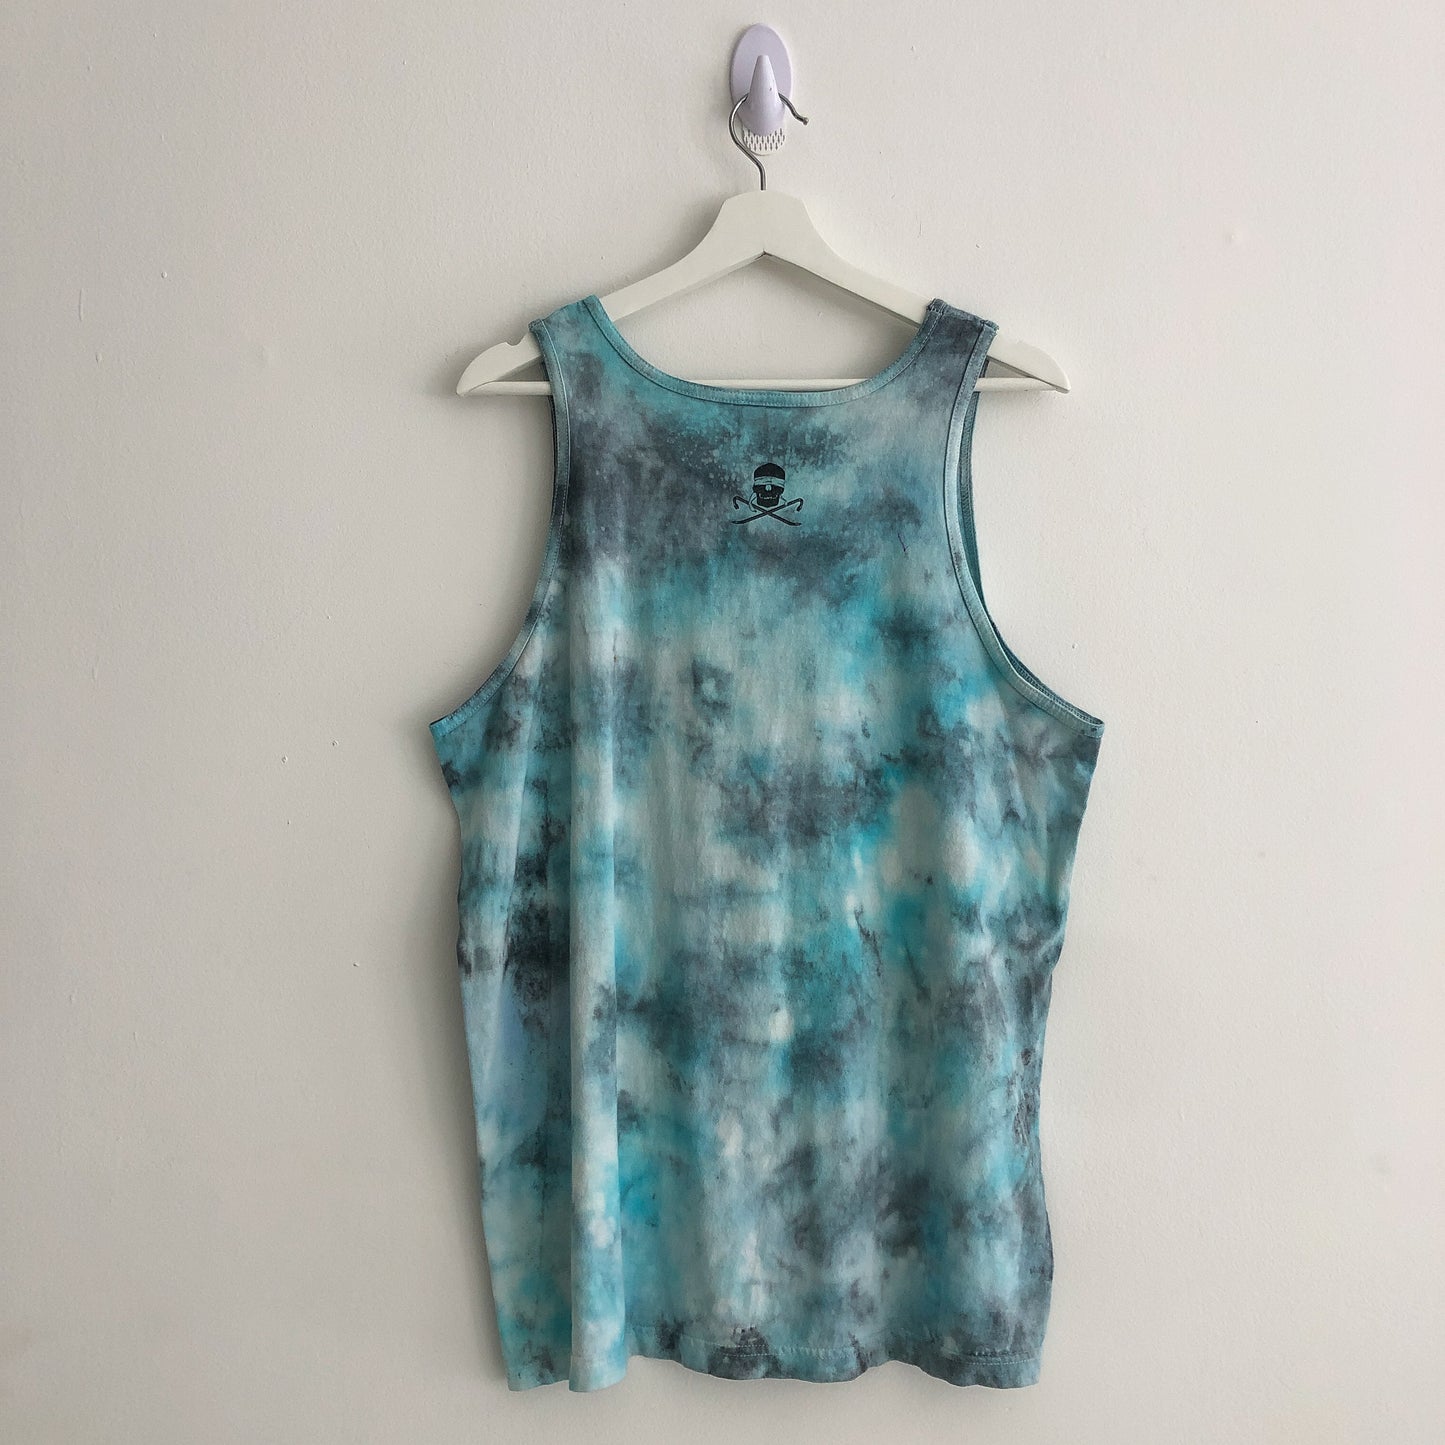 Upcycled Crks & Cstls Dyed Tank